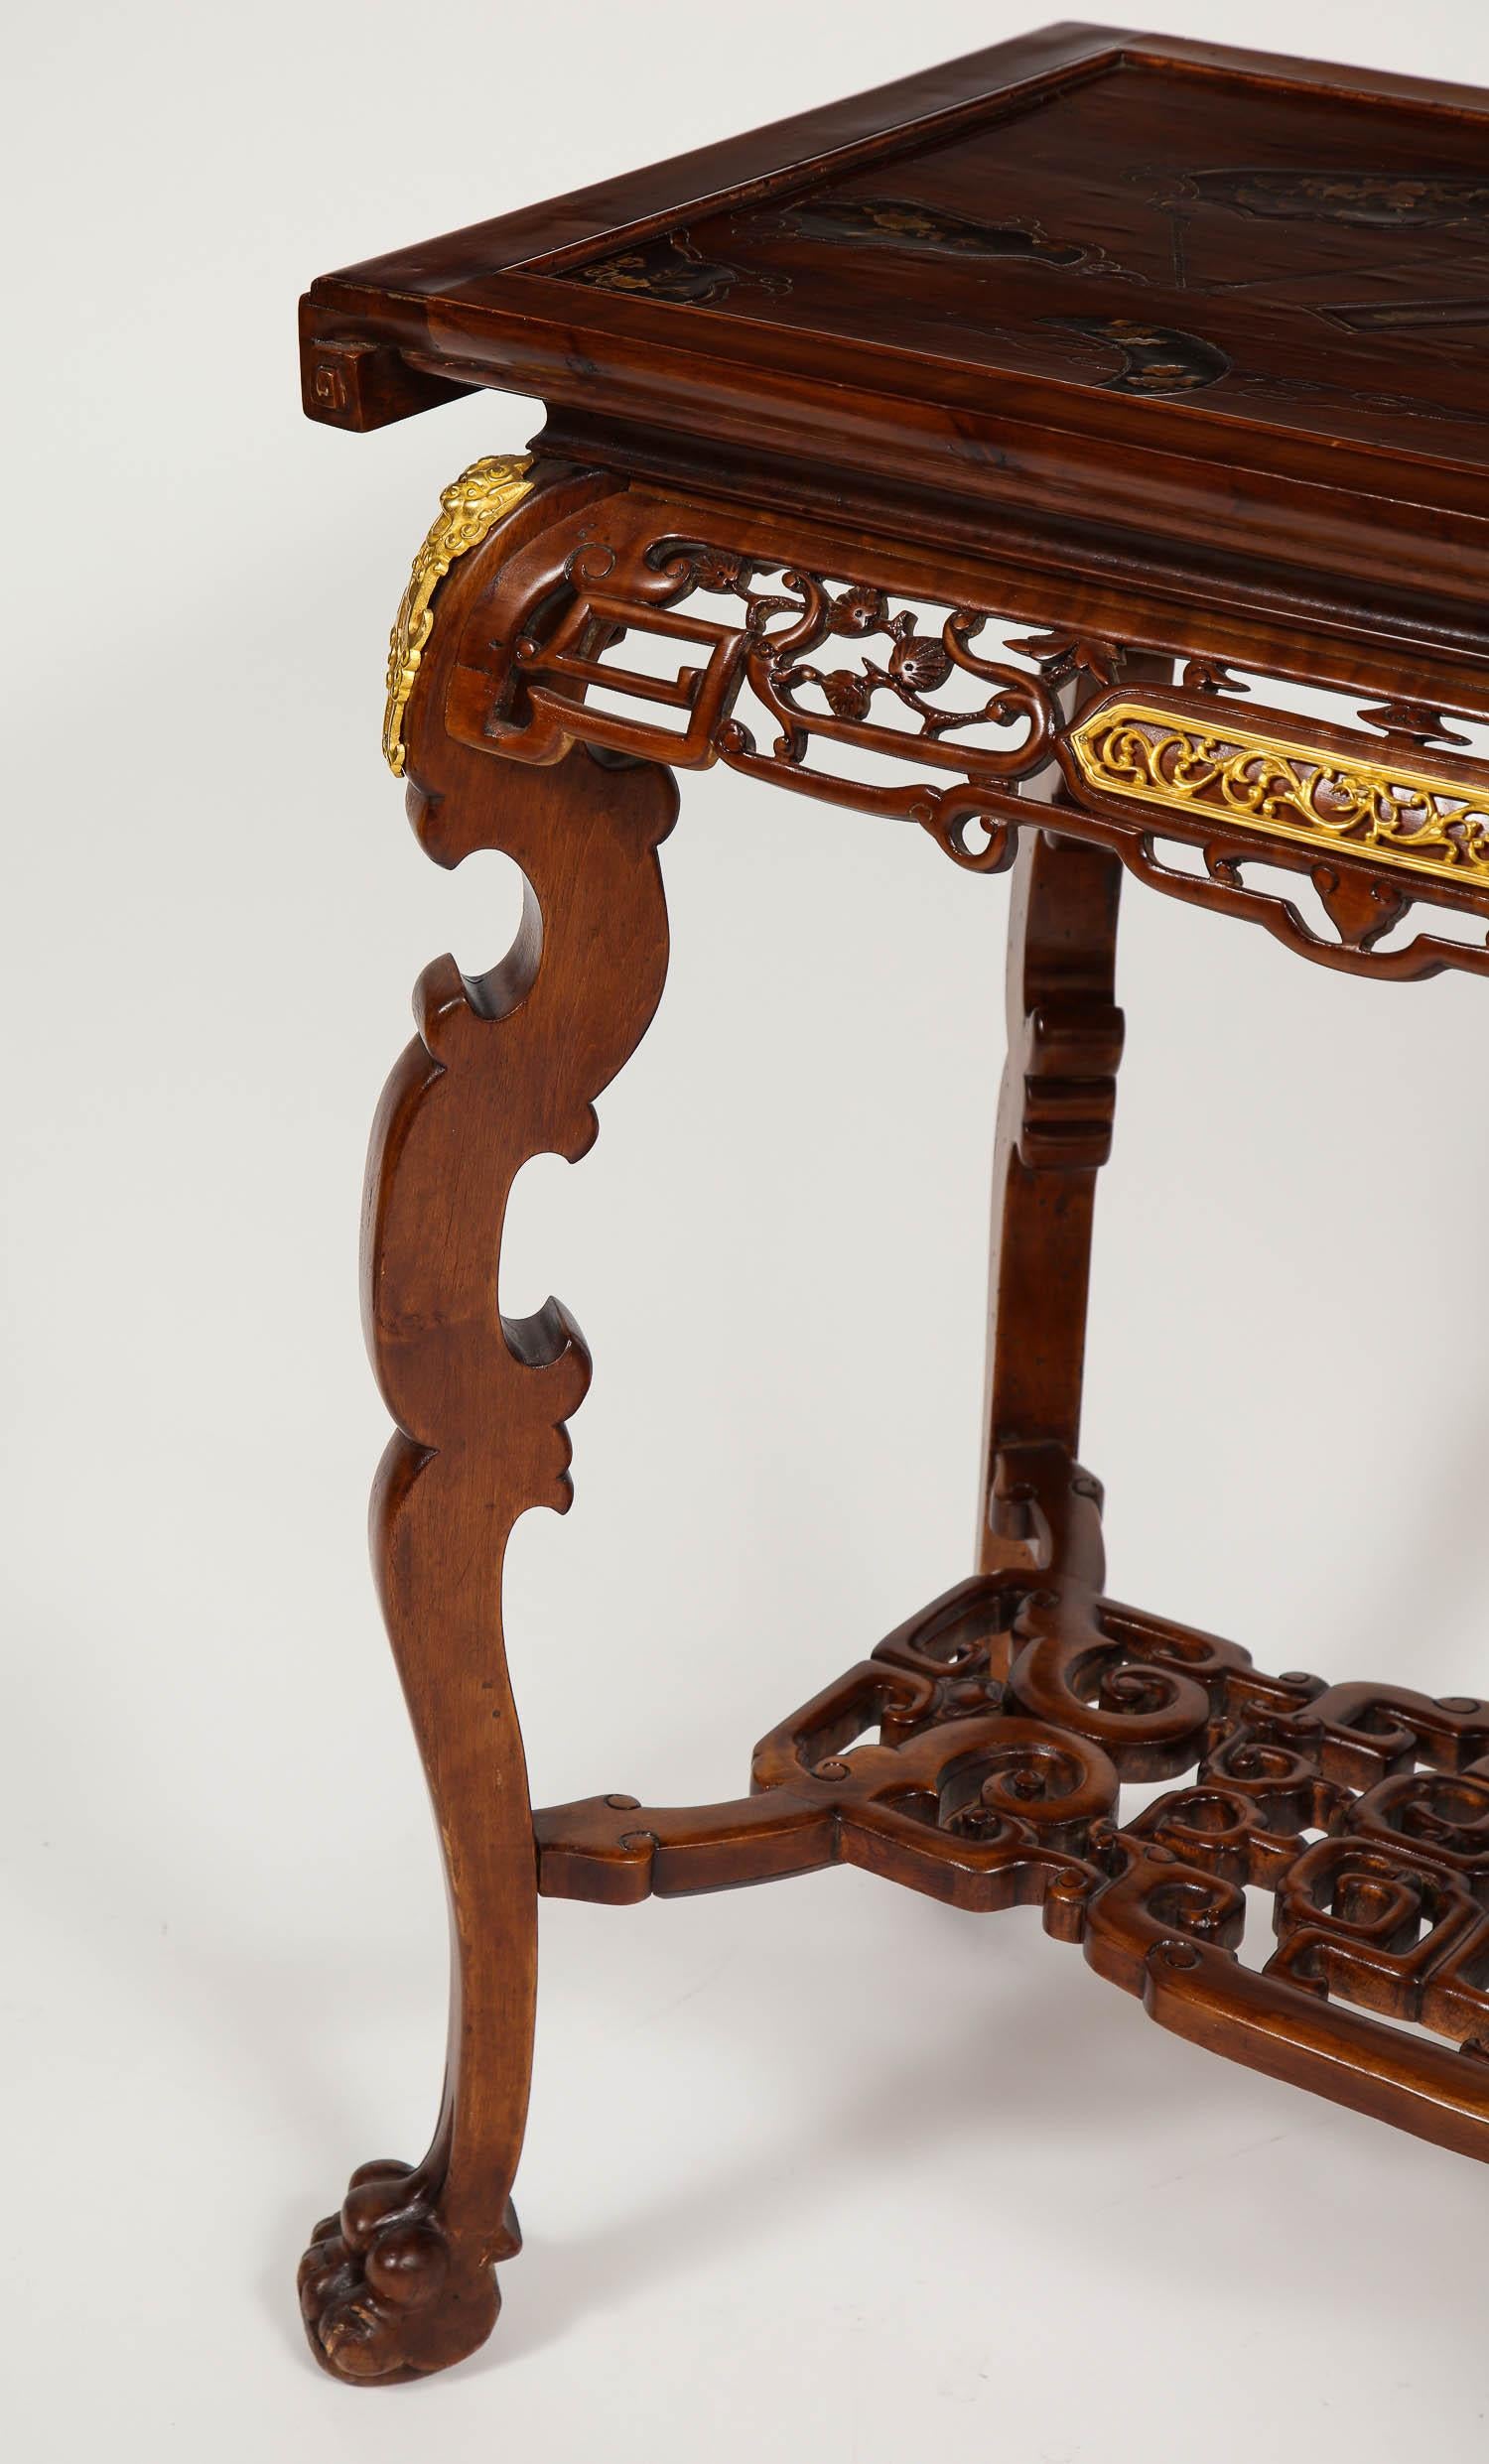 A magnificent 19th century French hand-carved chinoiserie style mahogany center-table with mother-of-pearl inlaid marquetry top attributed to Gabriel Viardot. This magnificent mahogany table has been hand-carved with Chinese chinoiserie decor